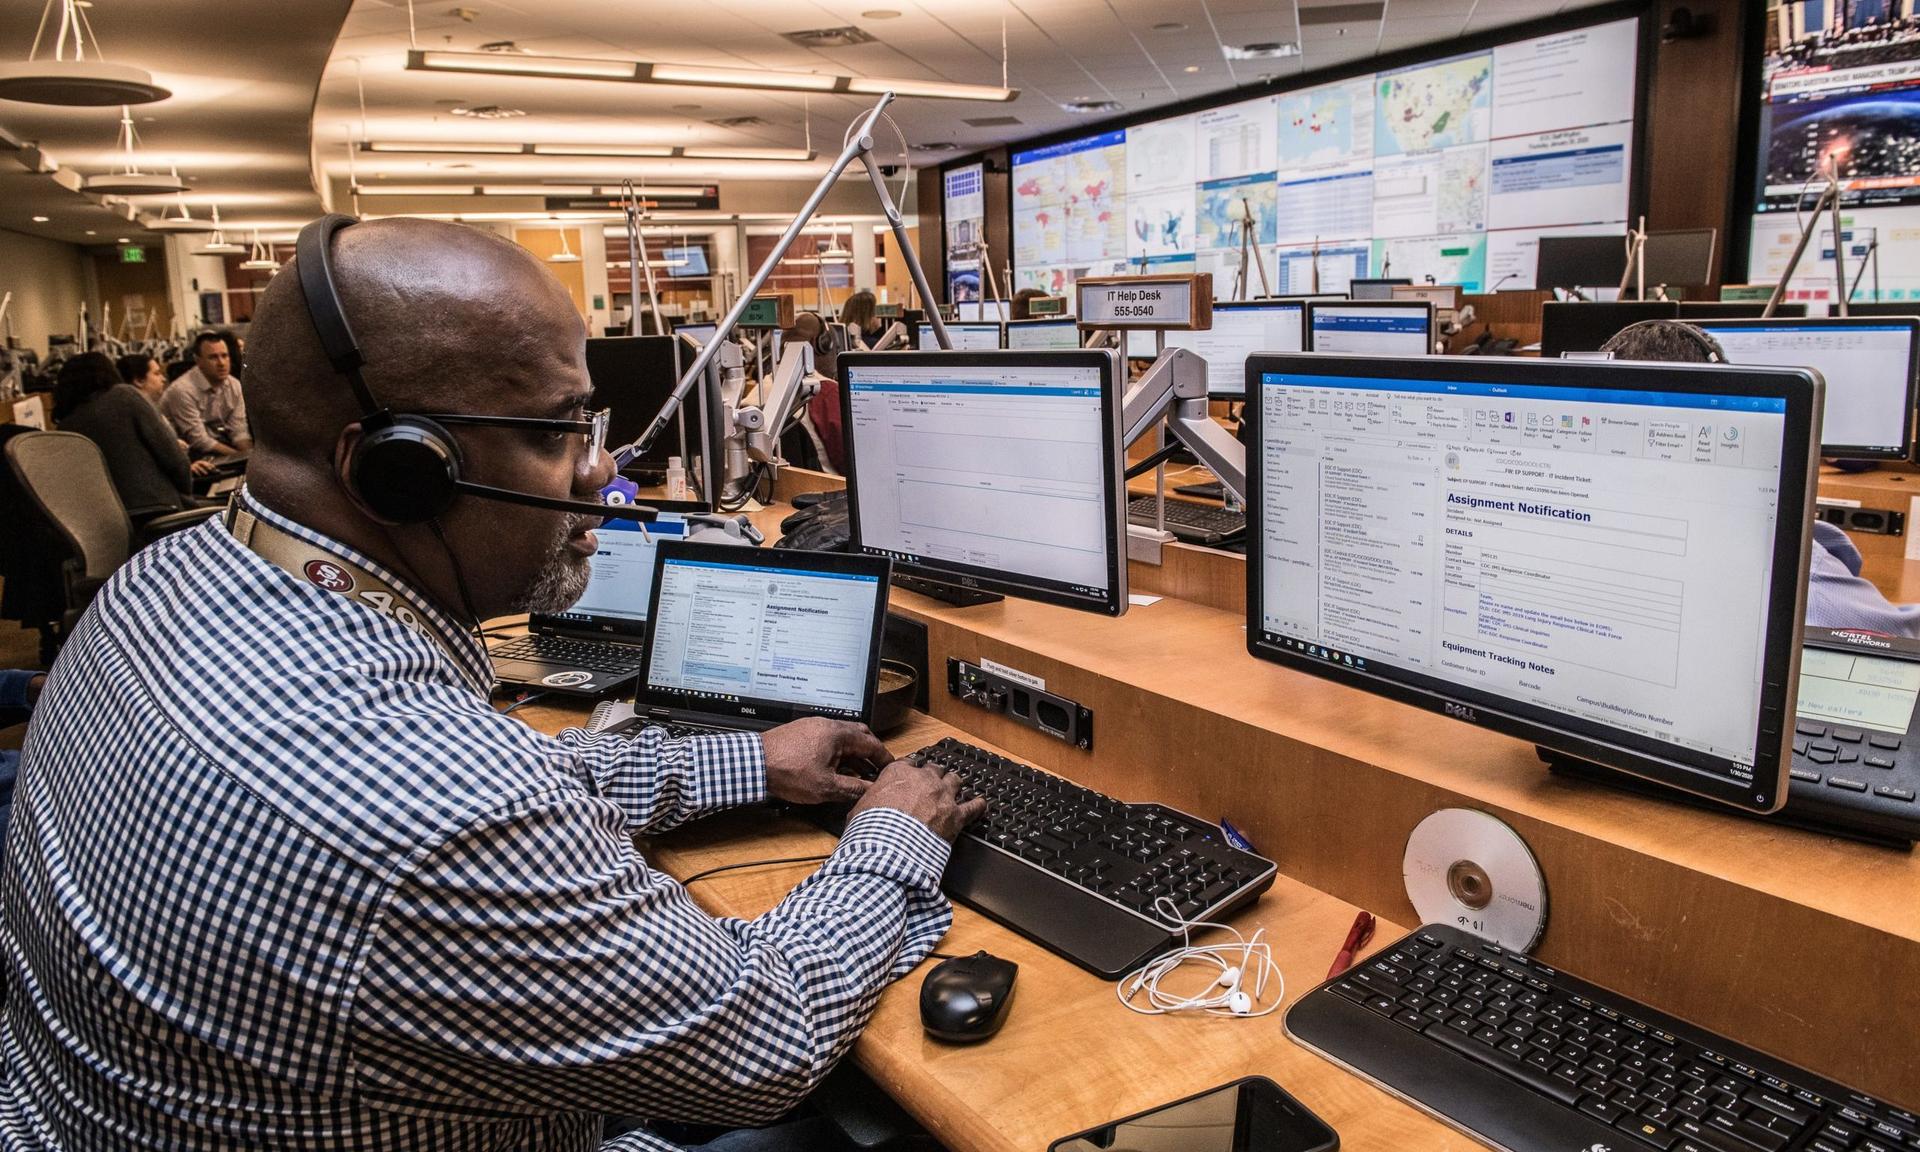 Centers for Disease Control and Prevention (CDC) activated its Emergency Operations Center to assist public health partners in responding to COVID-19. New research shows how the pandemic is impacting innovation priorities and technology adoption in the cybersecurity space. (CDC)